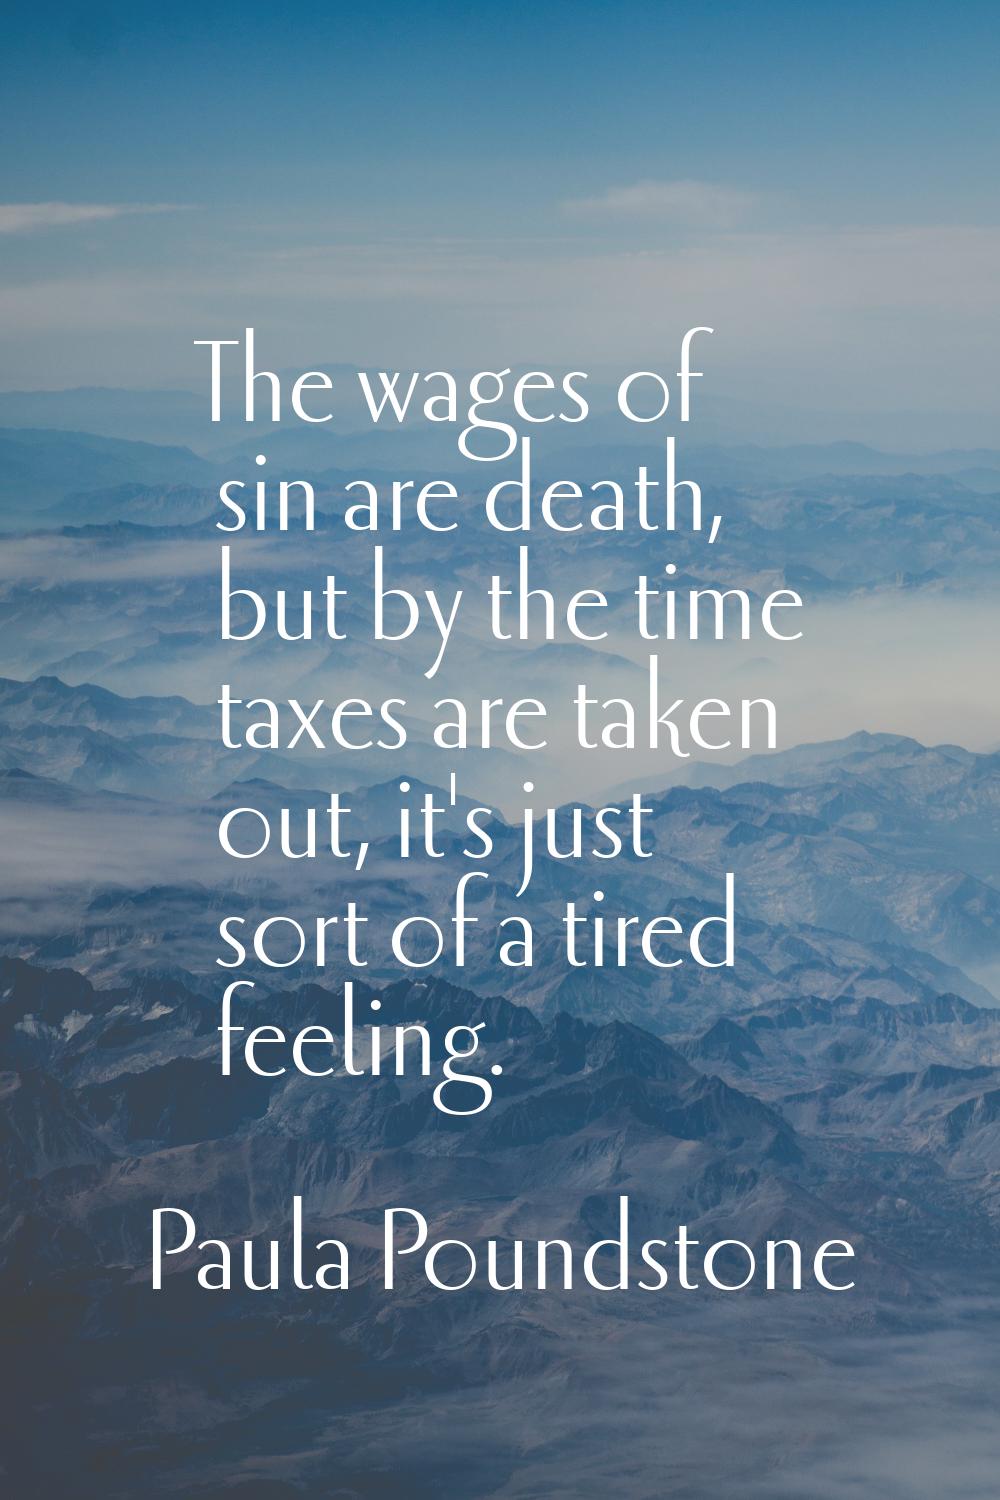 The wages of sin are death, but by the time taxes are taken out, it's just sort of a tired feeling.